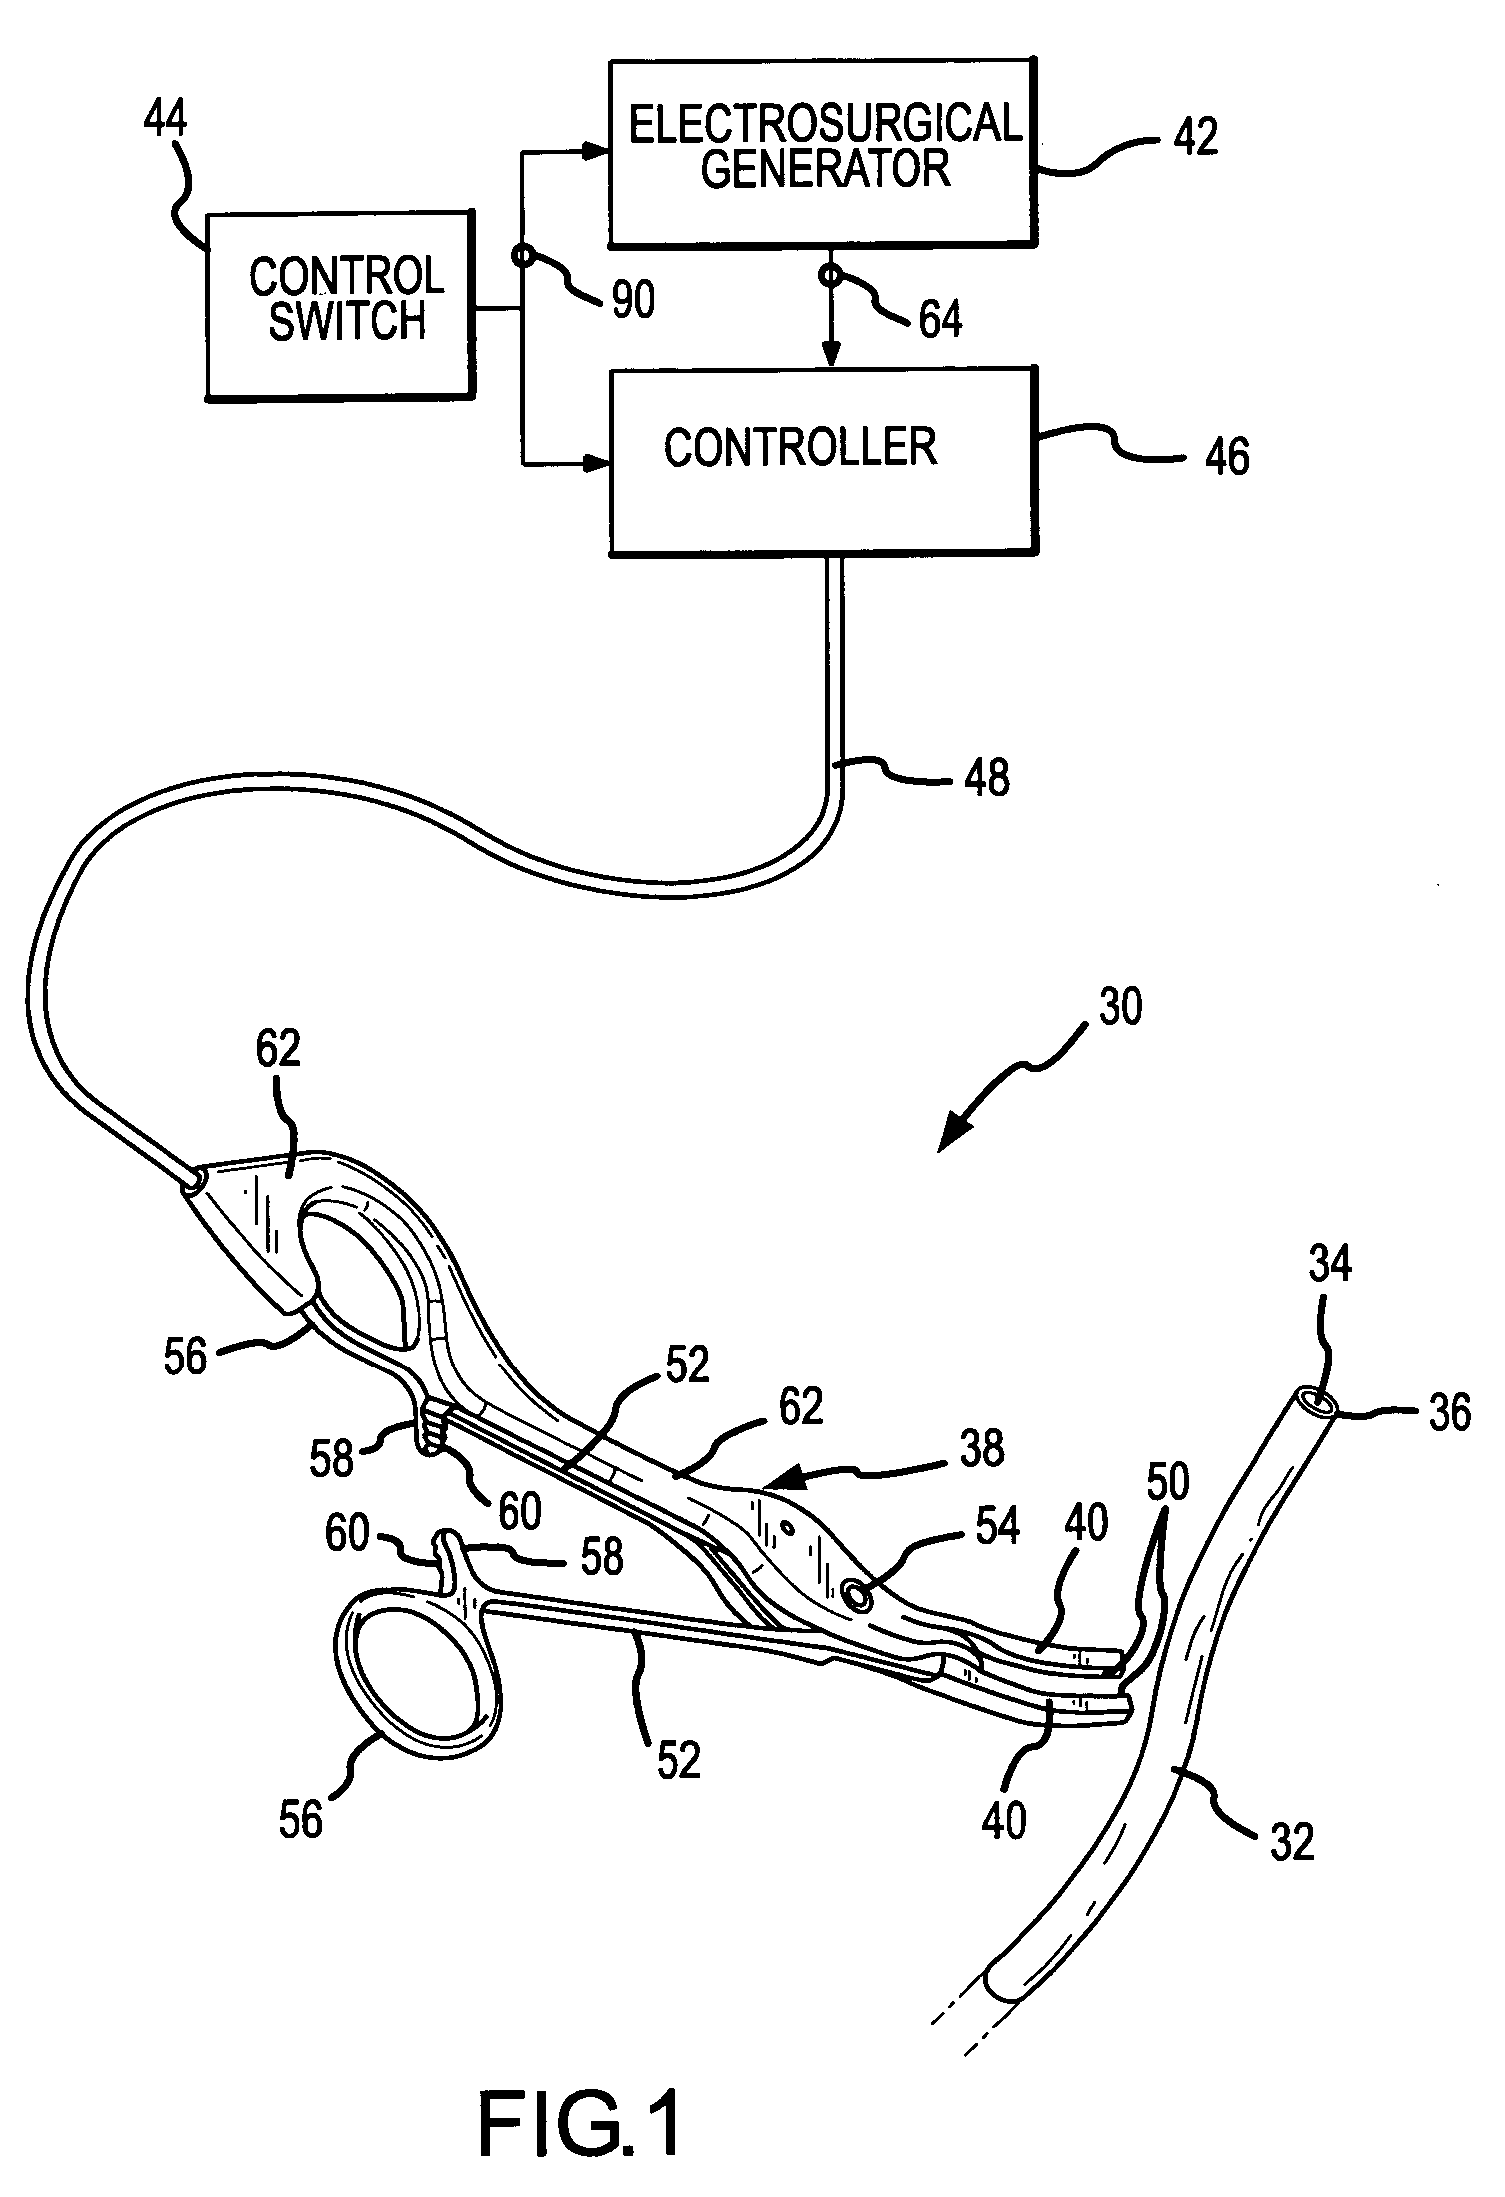 Method and apparatus for precursively controlling energy during coaptive tissue fusion